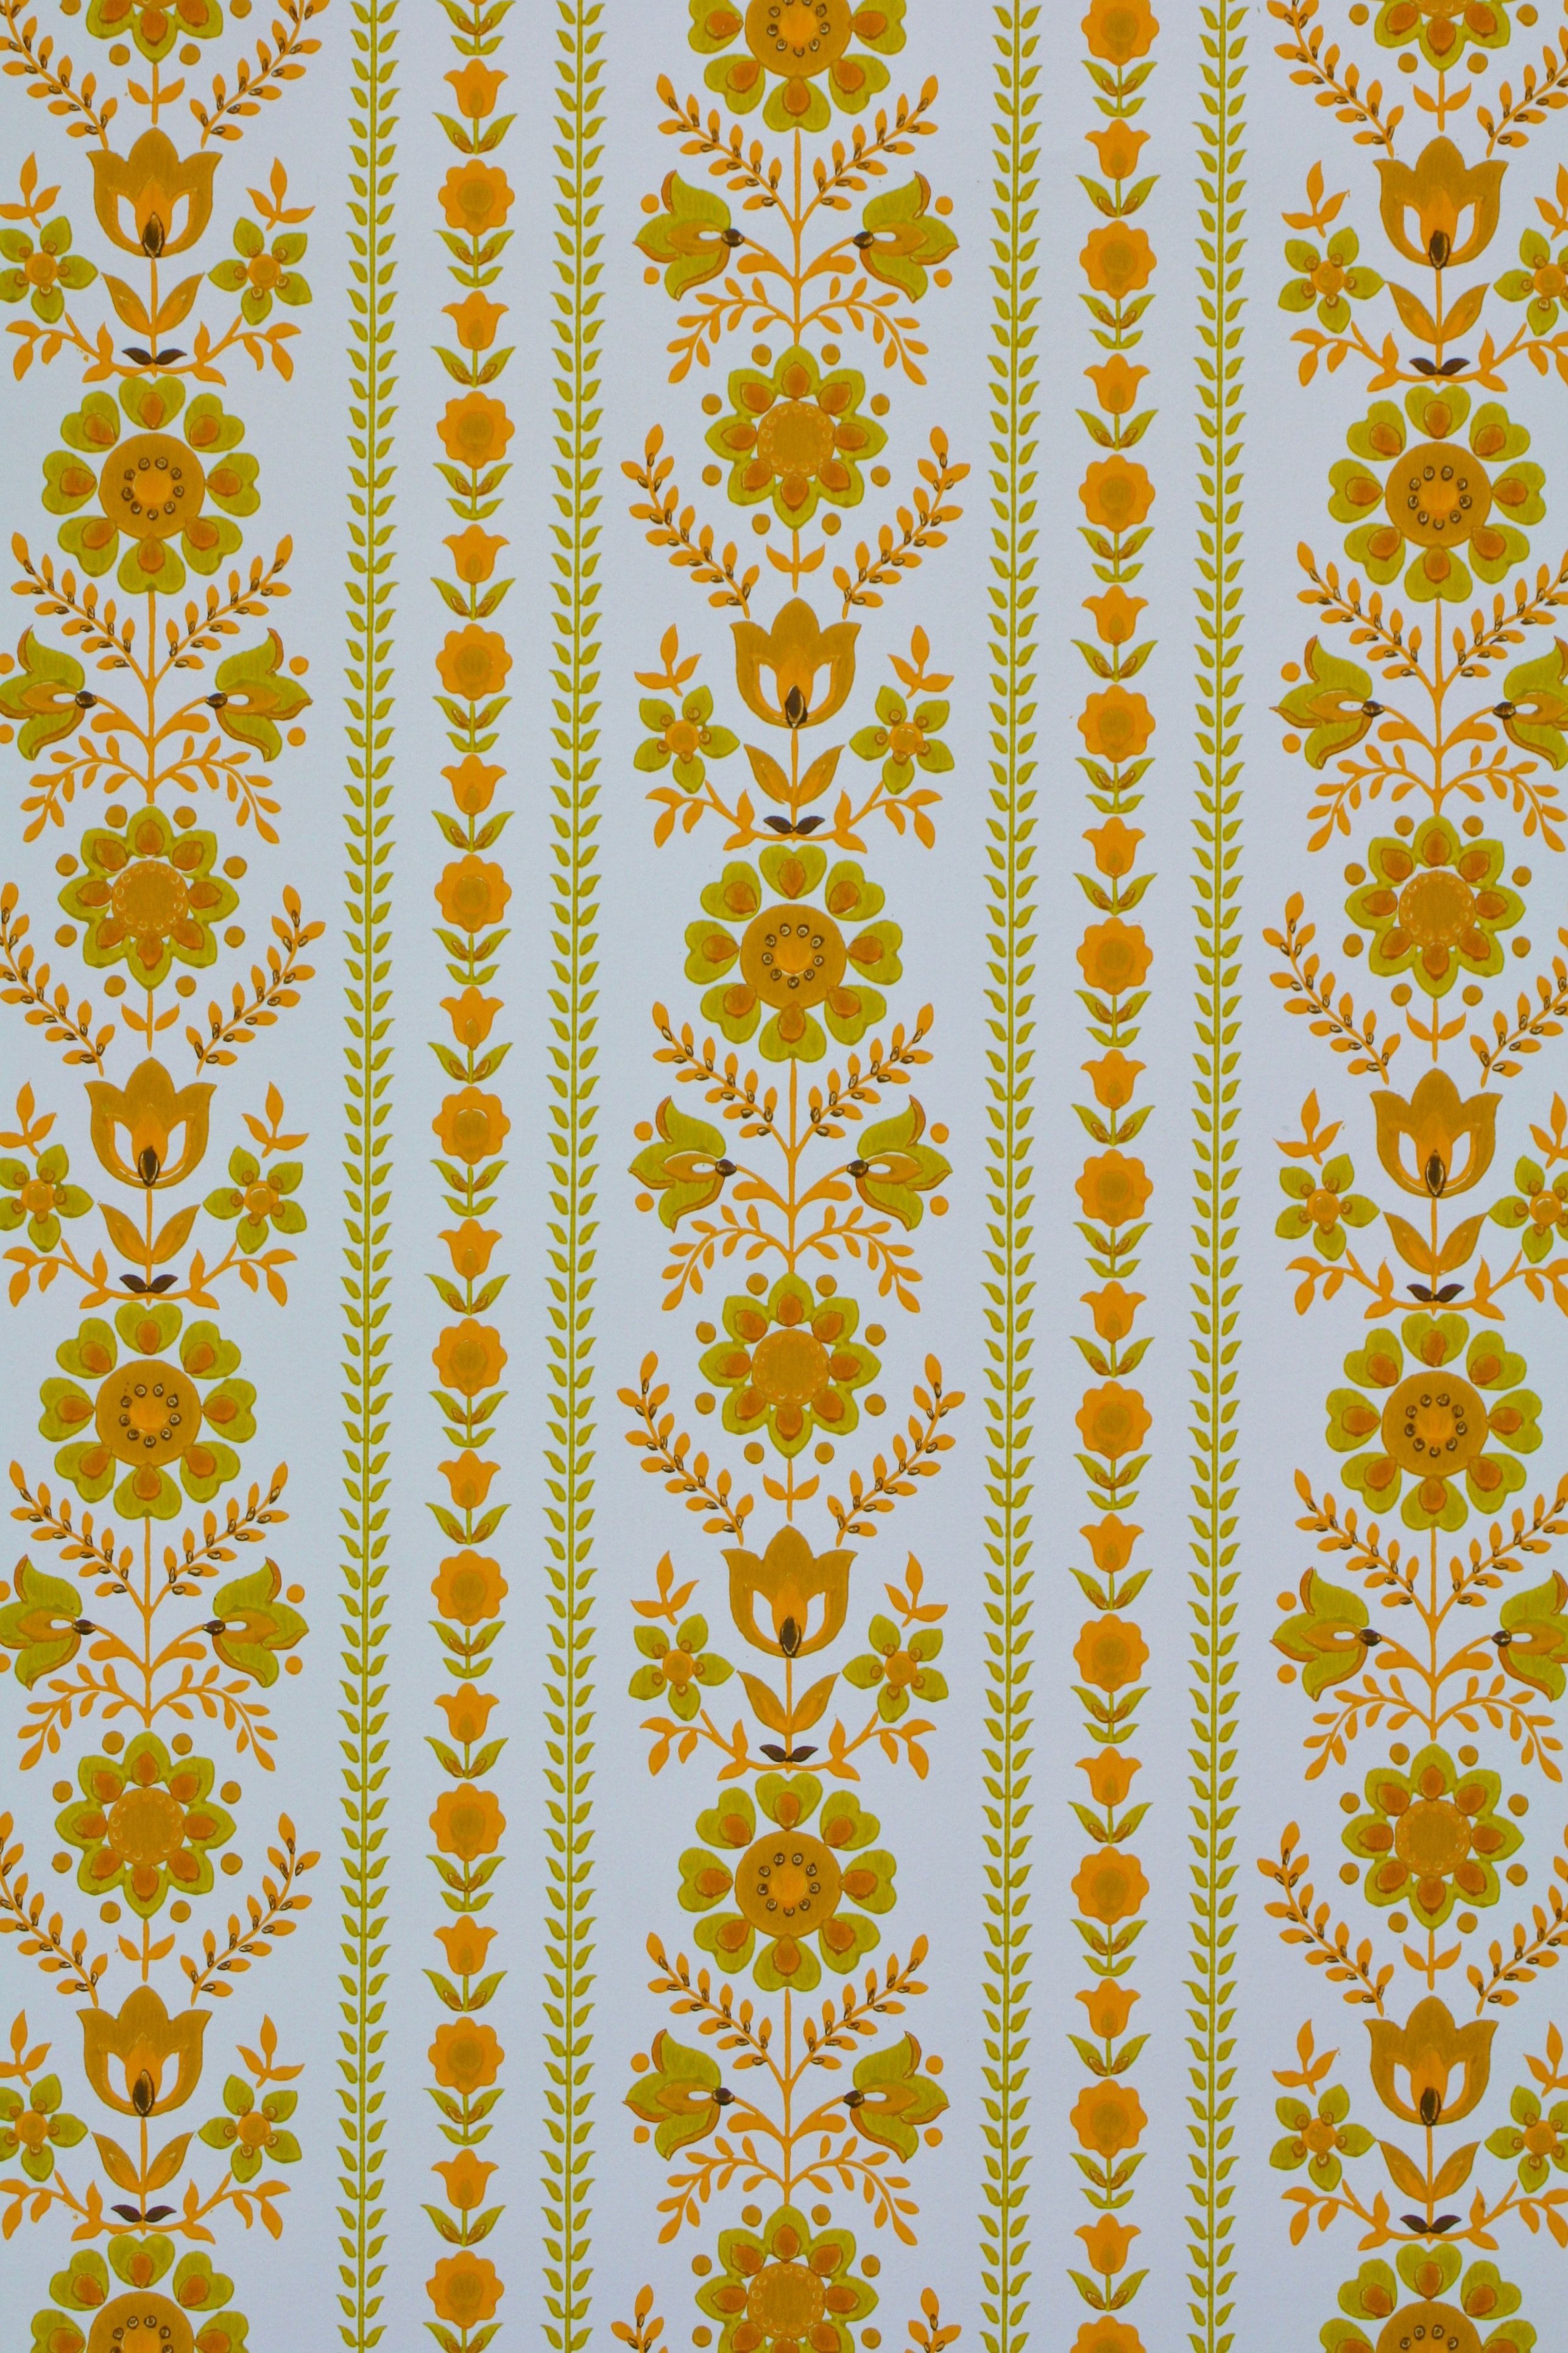 60s Wallpaper Free 60s Background